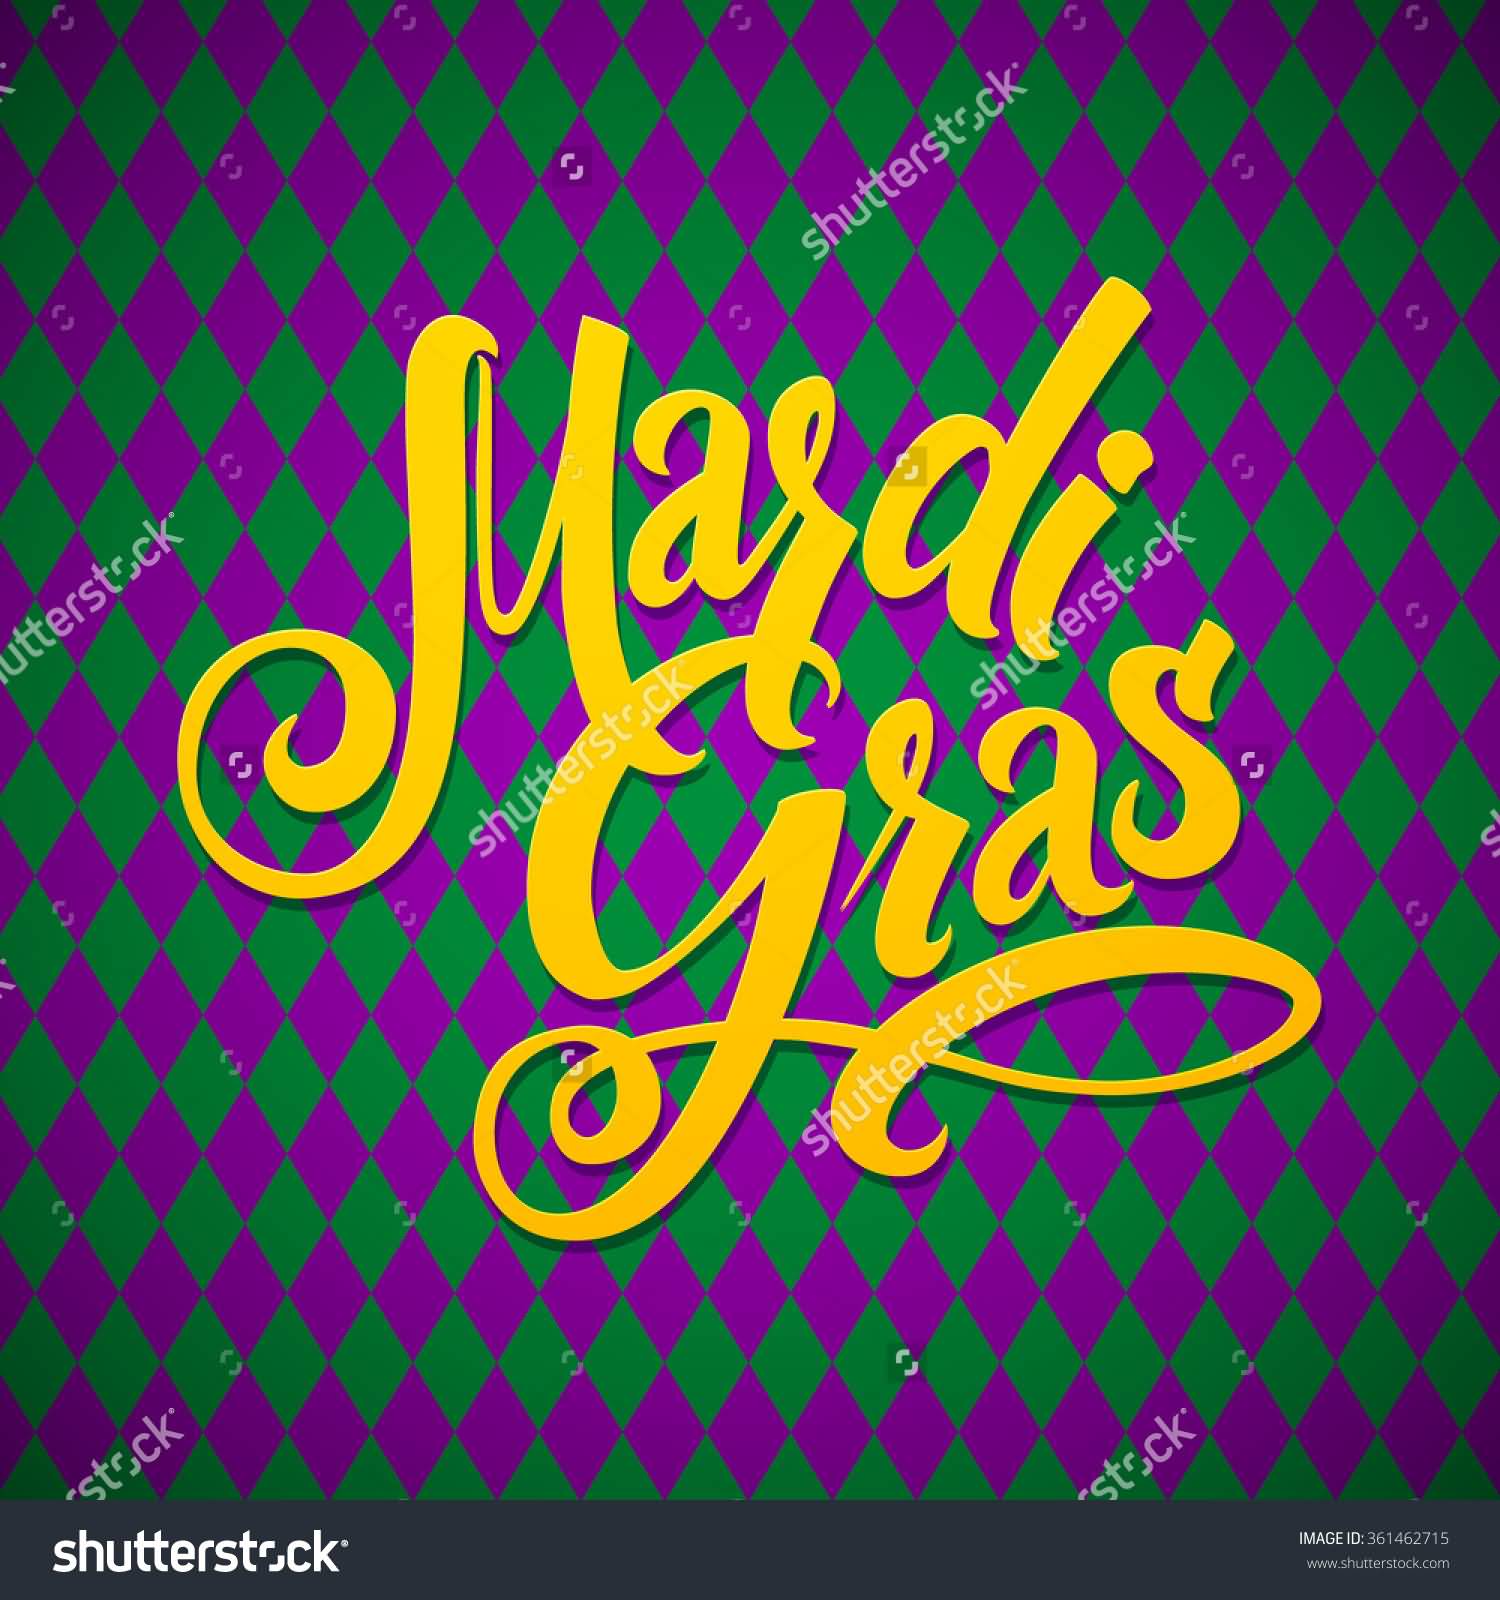 Mardi Gras Wishes Picture For Facebook